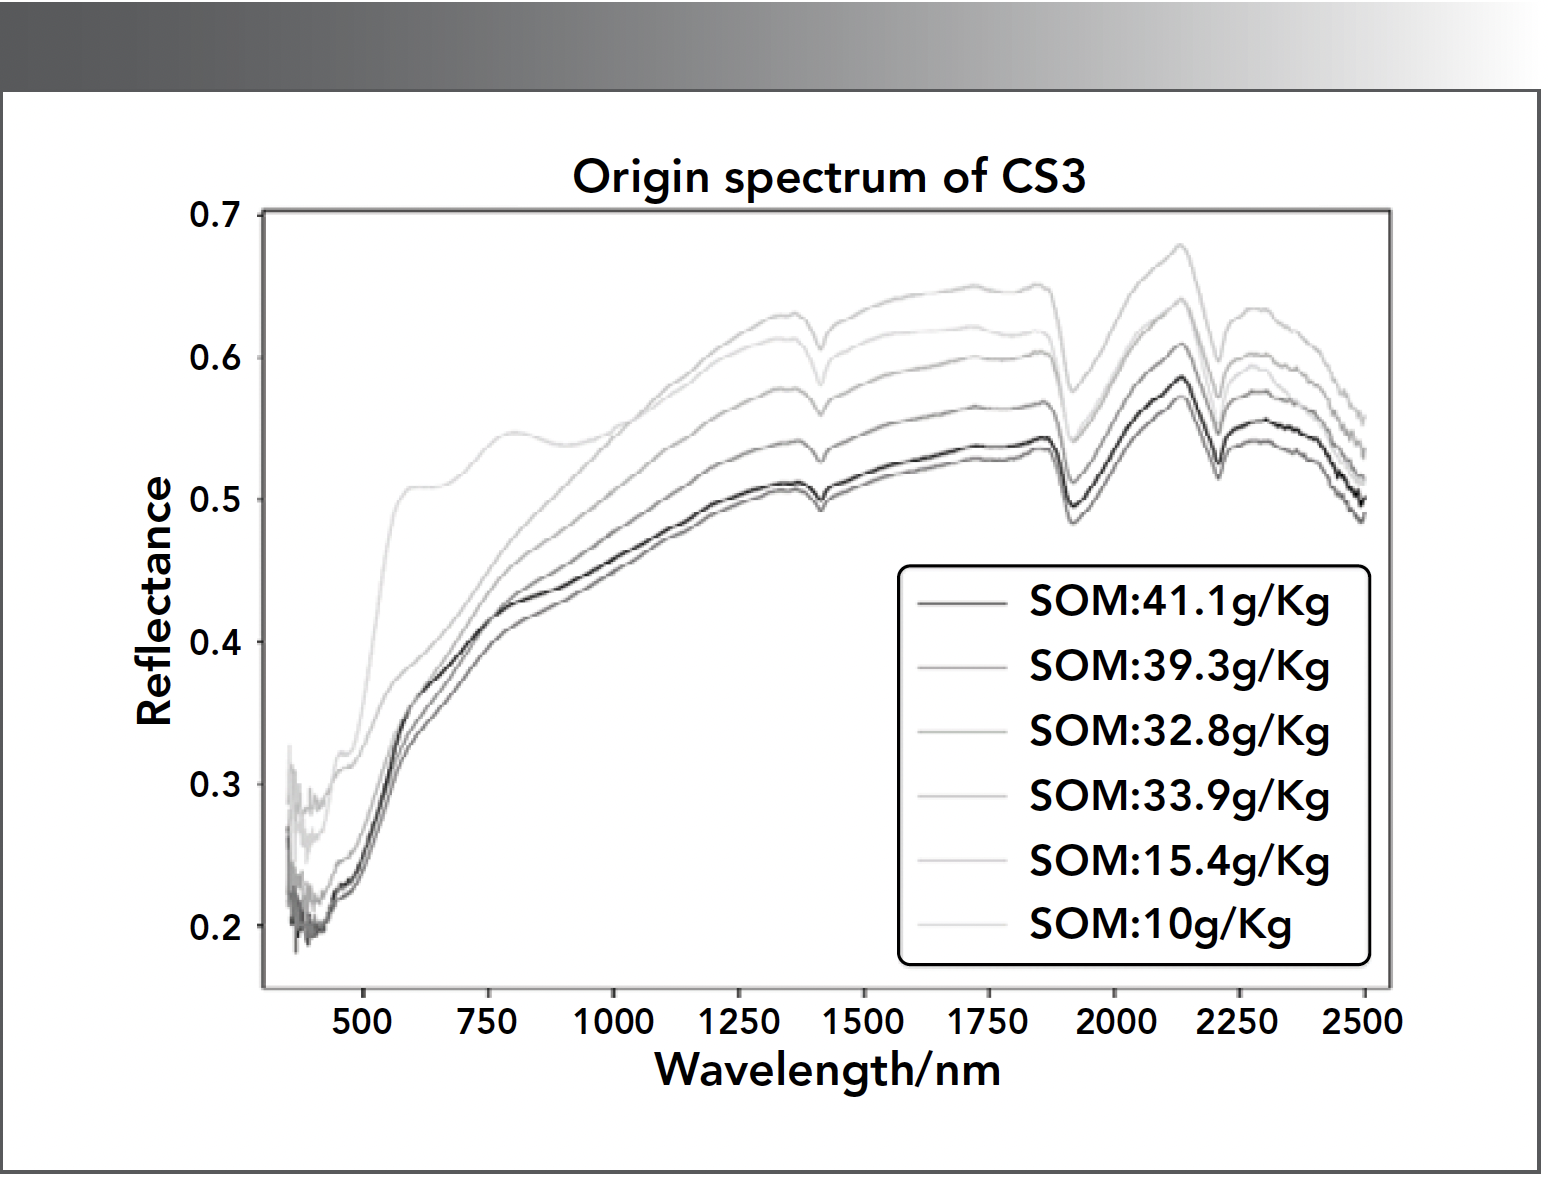 FIGURE 1: Spectral reflectance of soil samples with varying Soil Organic Matter (SOM) content. Six soil samples with distinct SOM content are analyzed at sampling point CS03, each represented by curves of different colors.